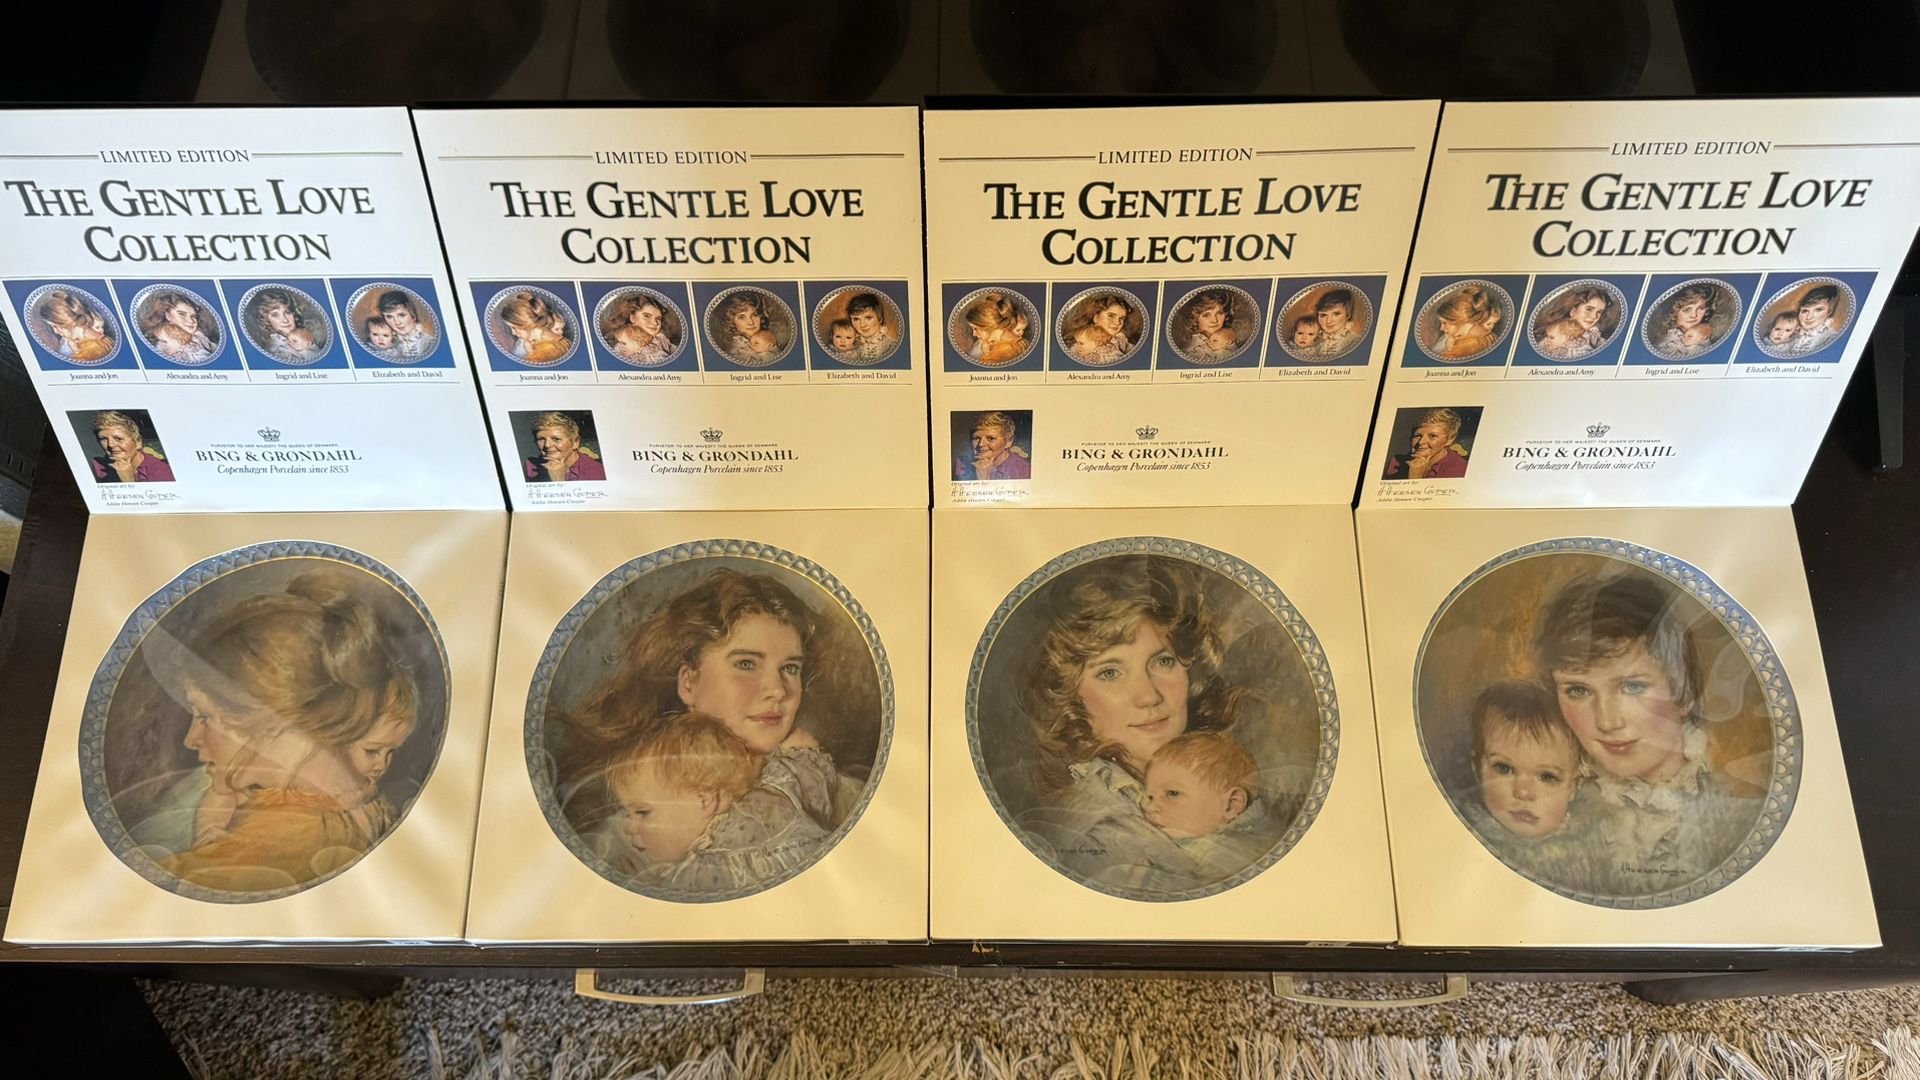 The Gentle Love Collection